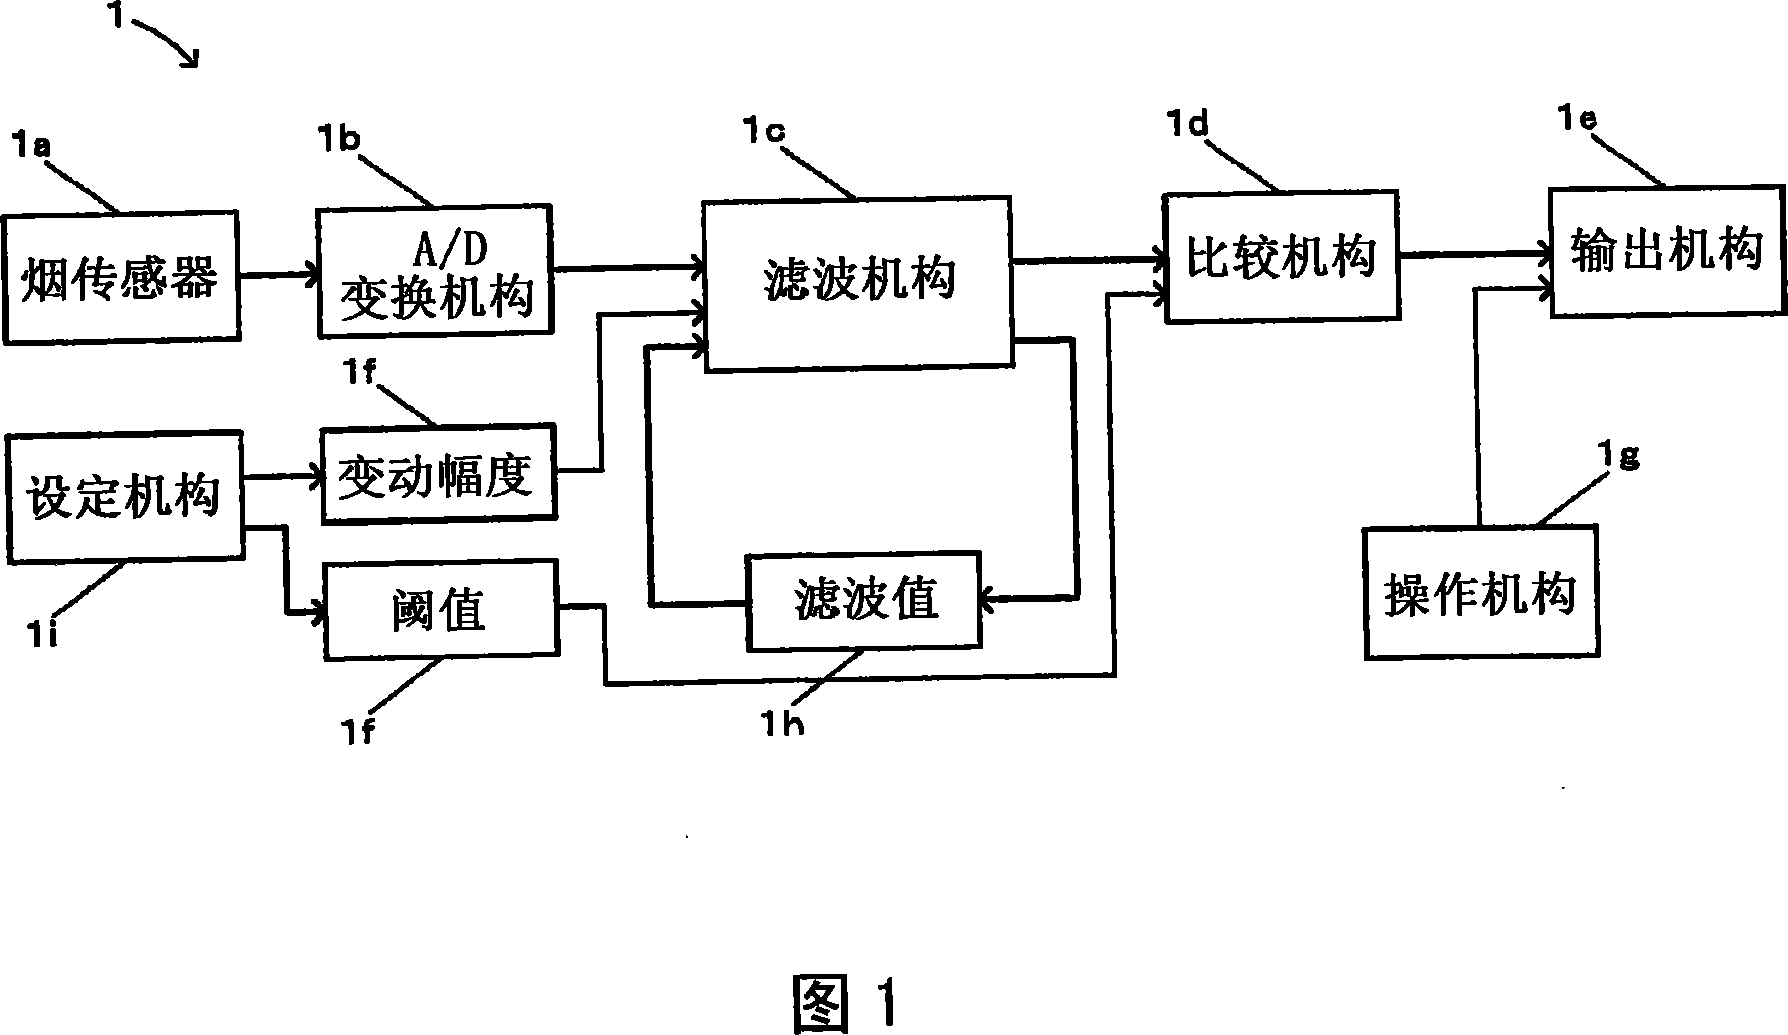 Fire differentiating method, fire alarm and fire receiver